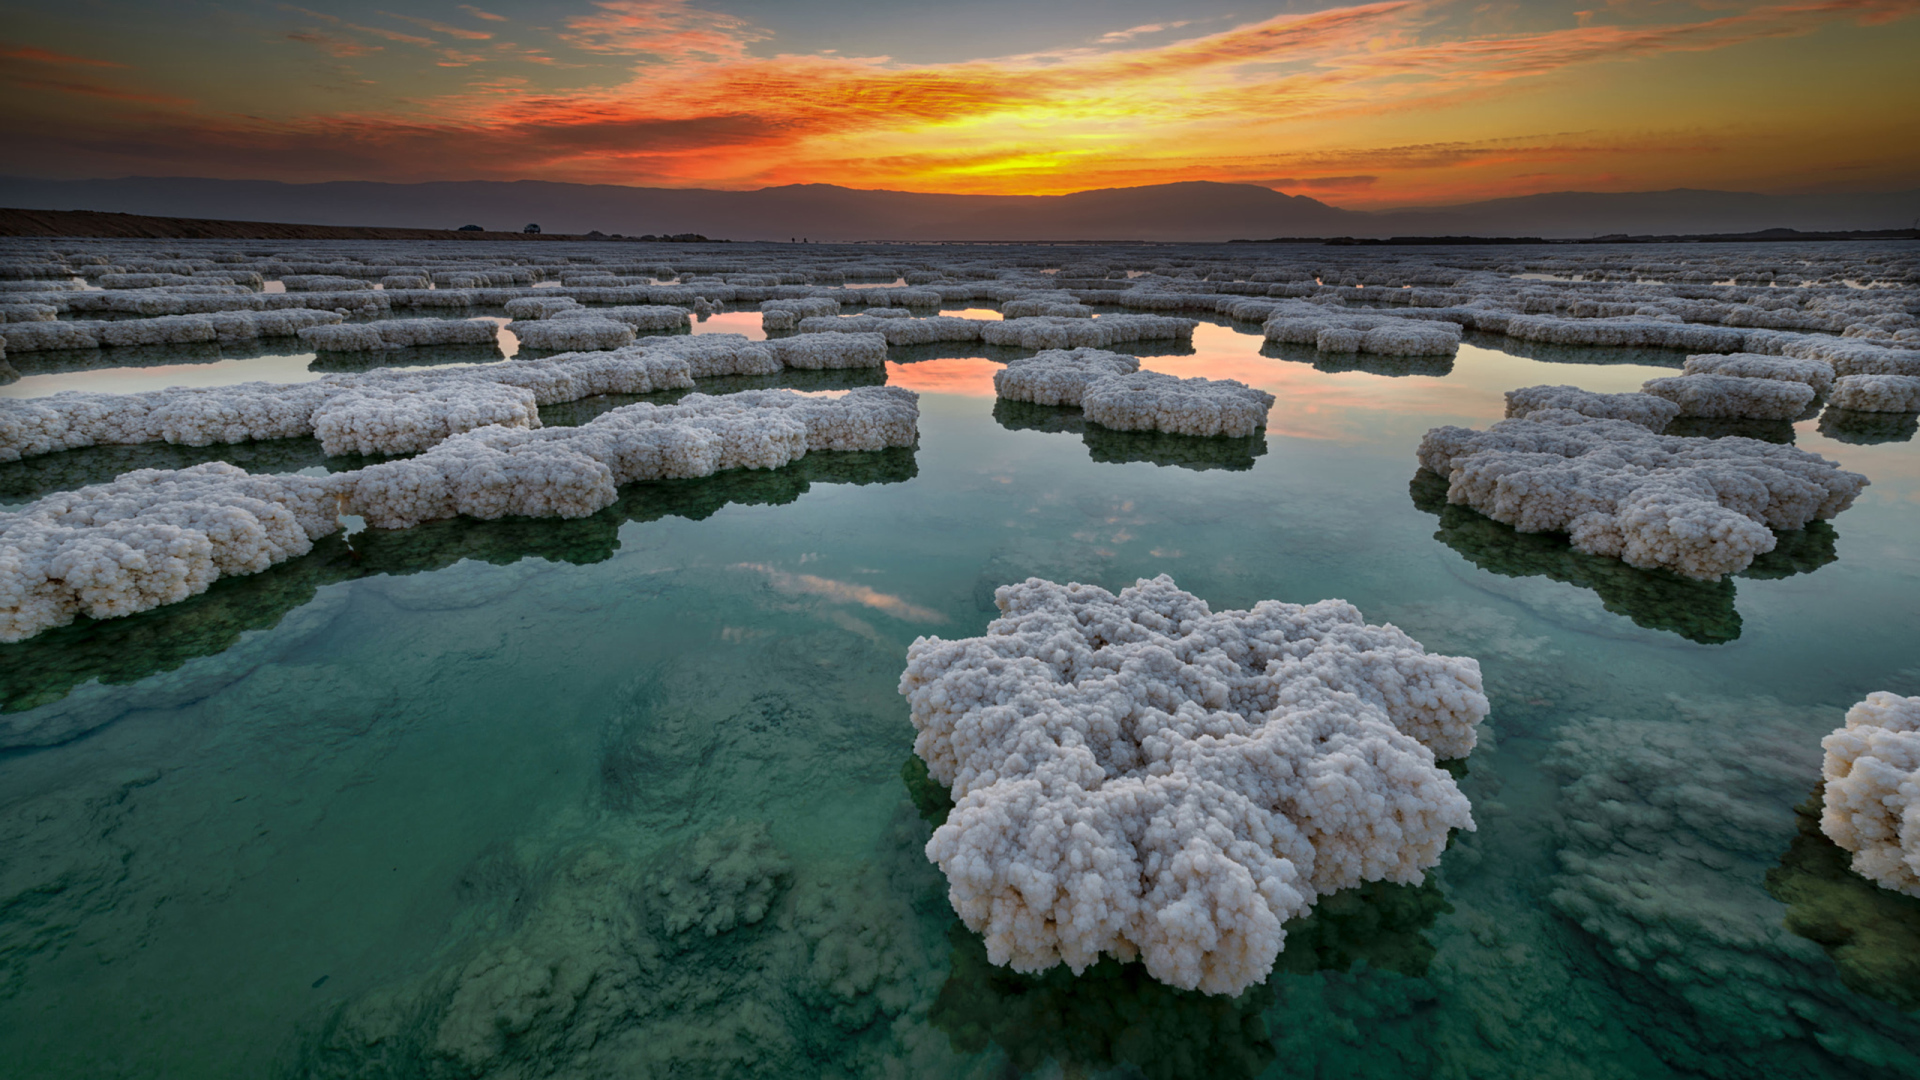 Salt deposits in the water under a beautiful sky at sunset